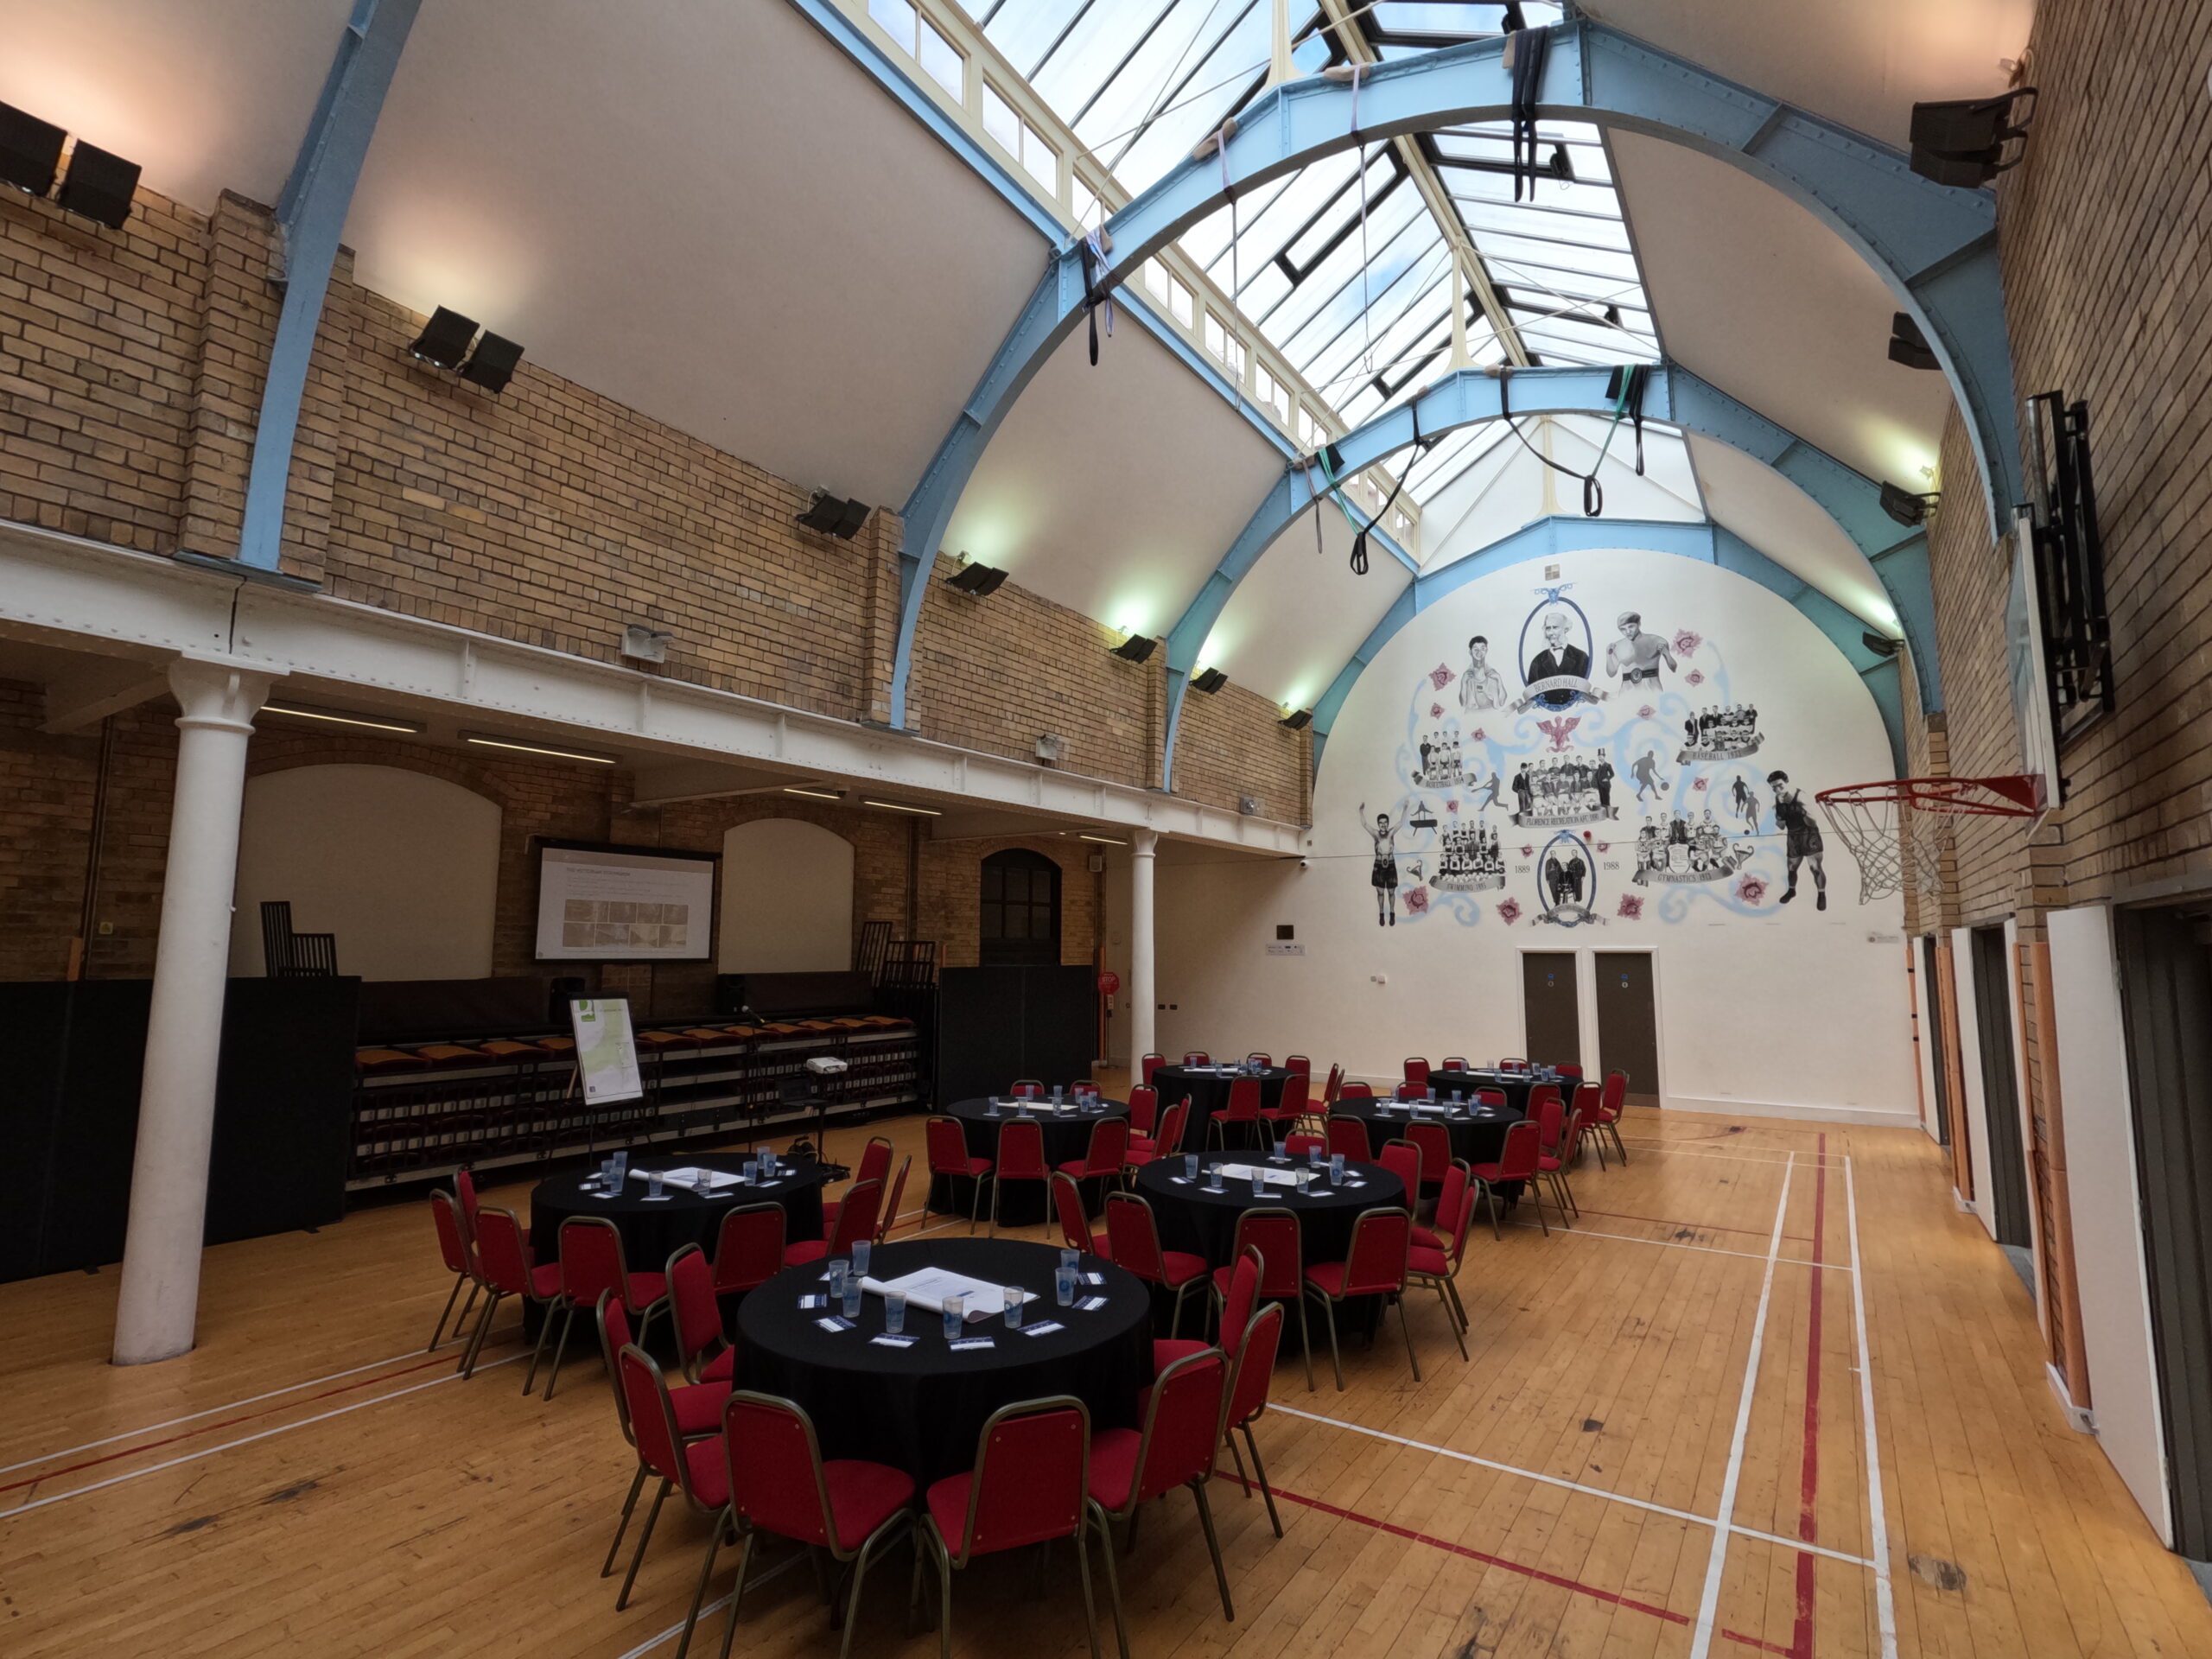 The Victorian Gym event space at The Florrie.